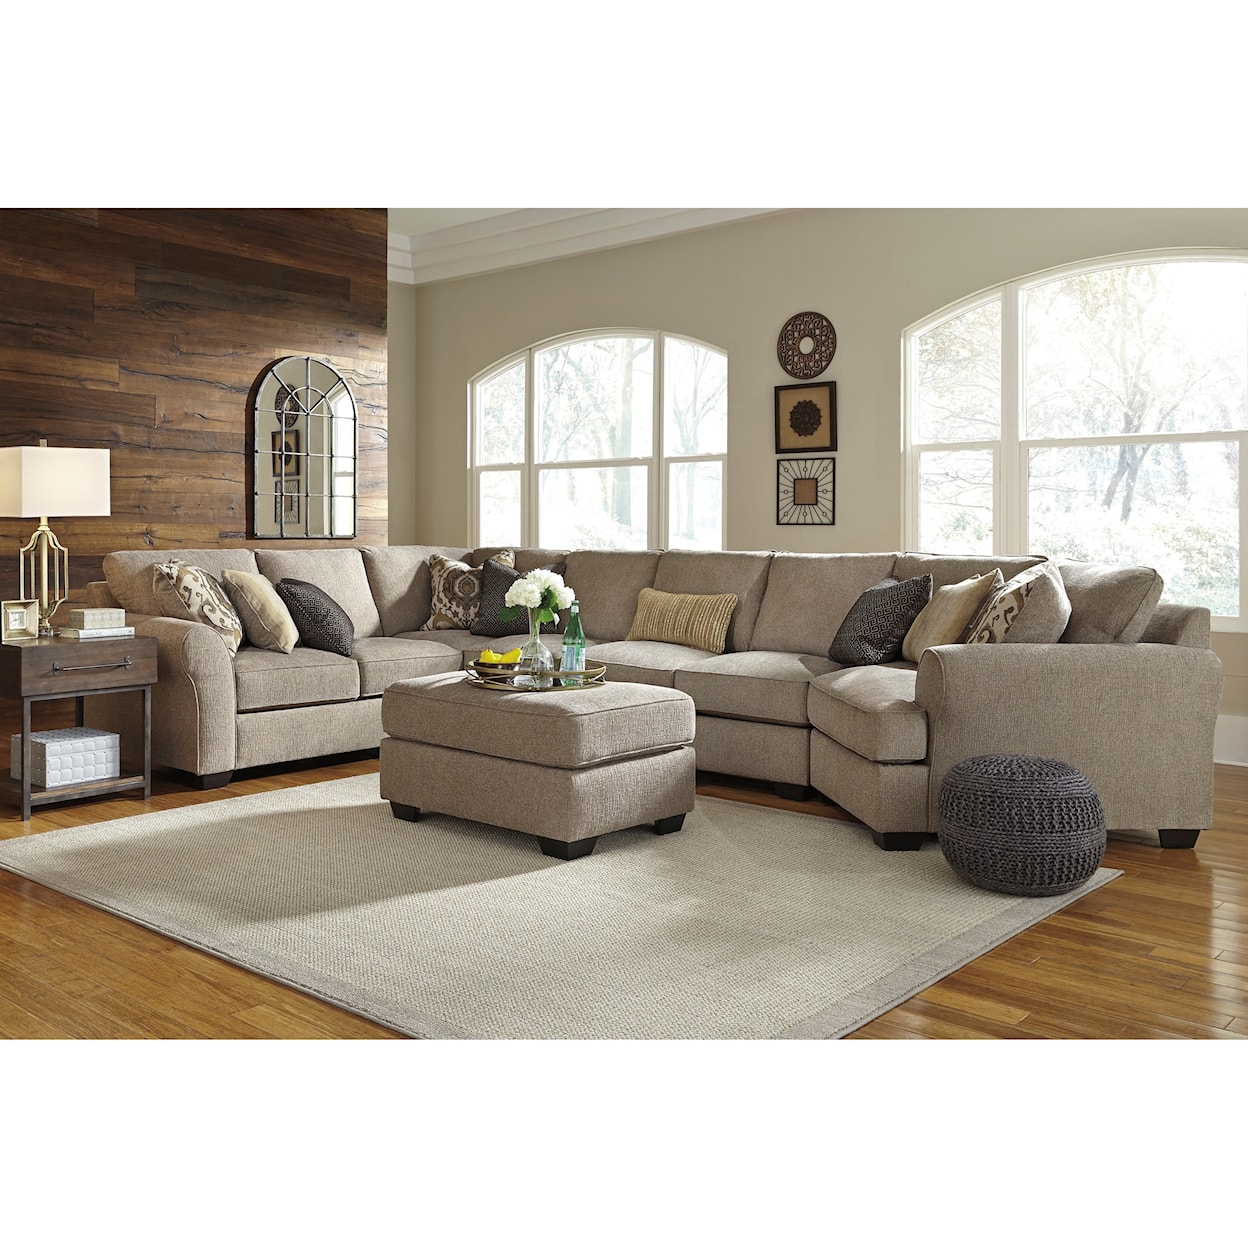 JB King Pantomine 4-Piece Sectional with Ottoman